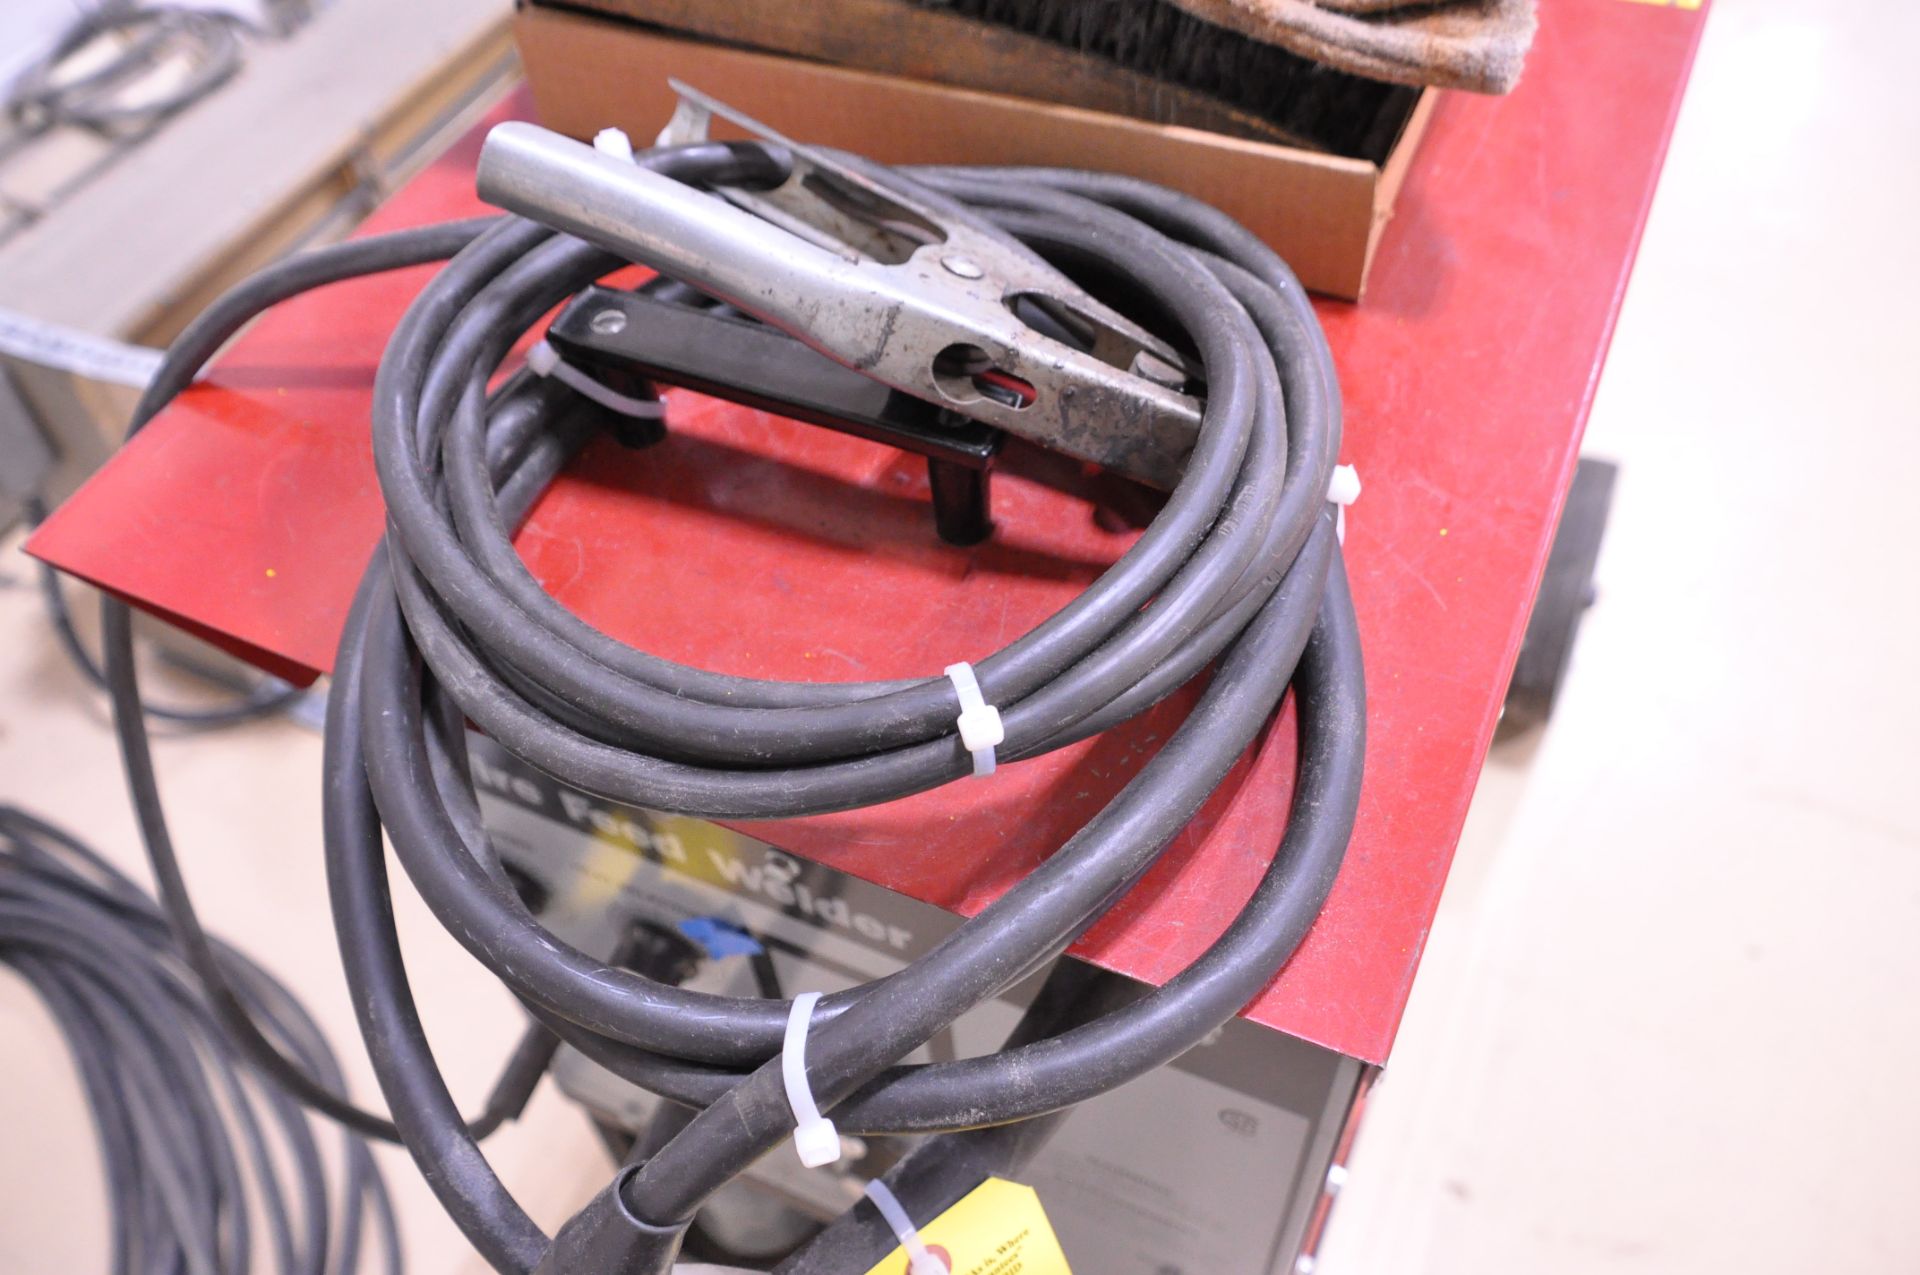 Dayton 3Z914D, Model 117-037-902, DC Wire Feed Mig Welder, S/n F286693 (1994), with Leads, - Image 4 of 6